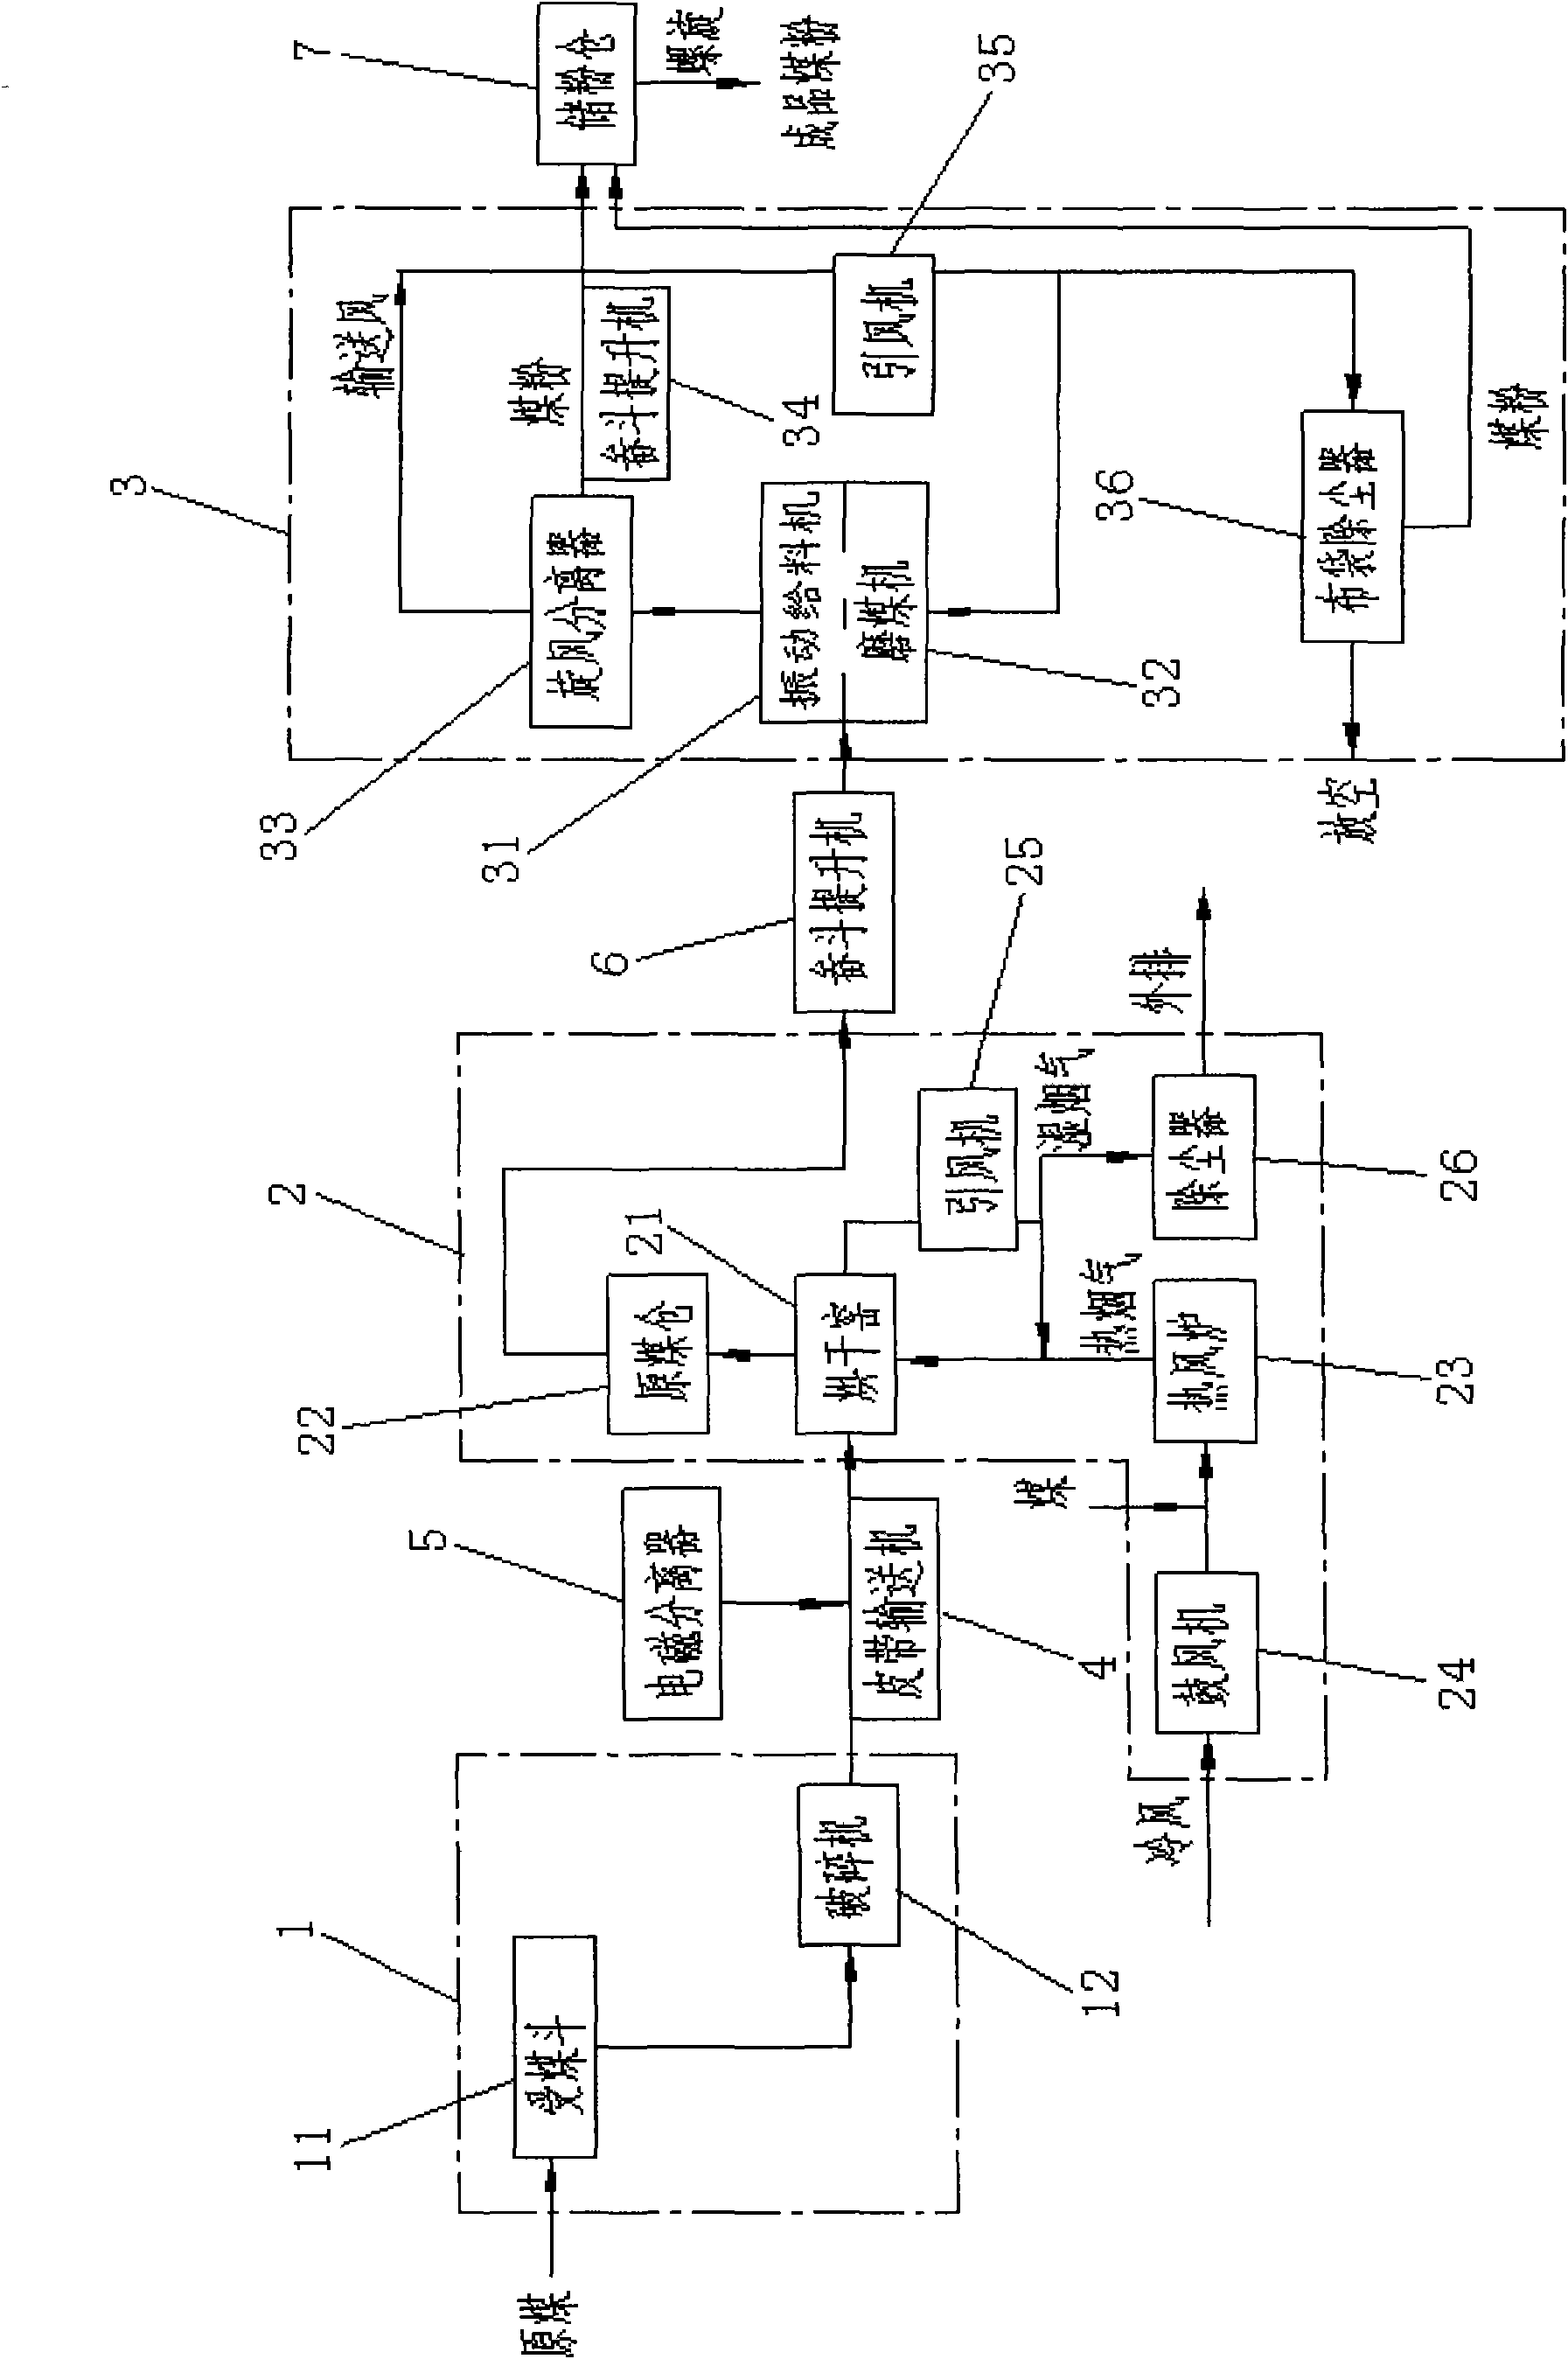 System and process for coal powder preparation